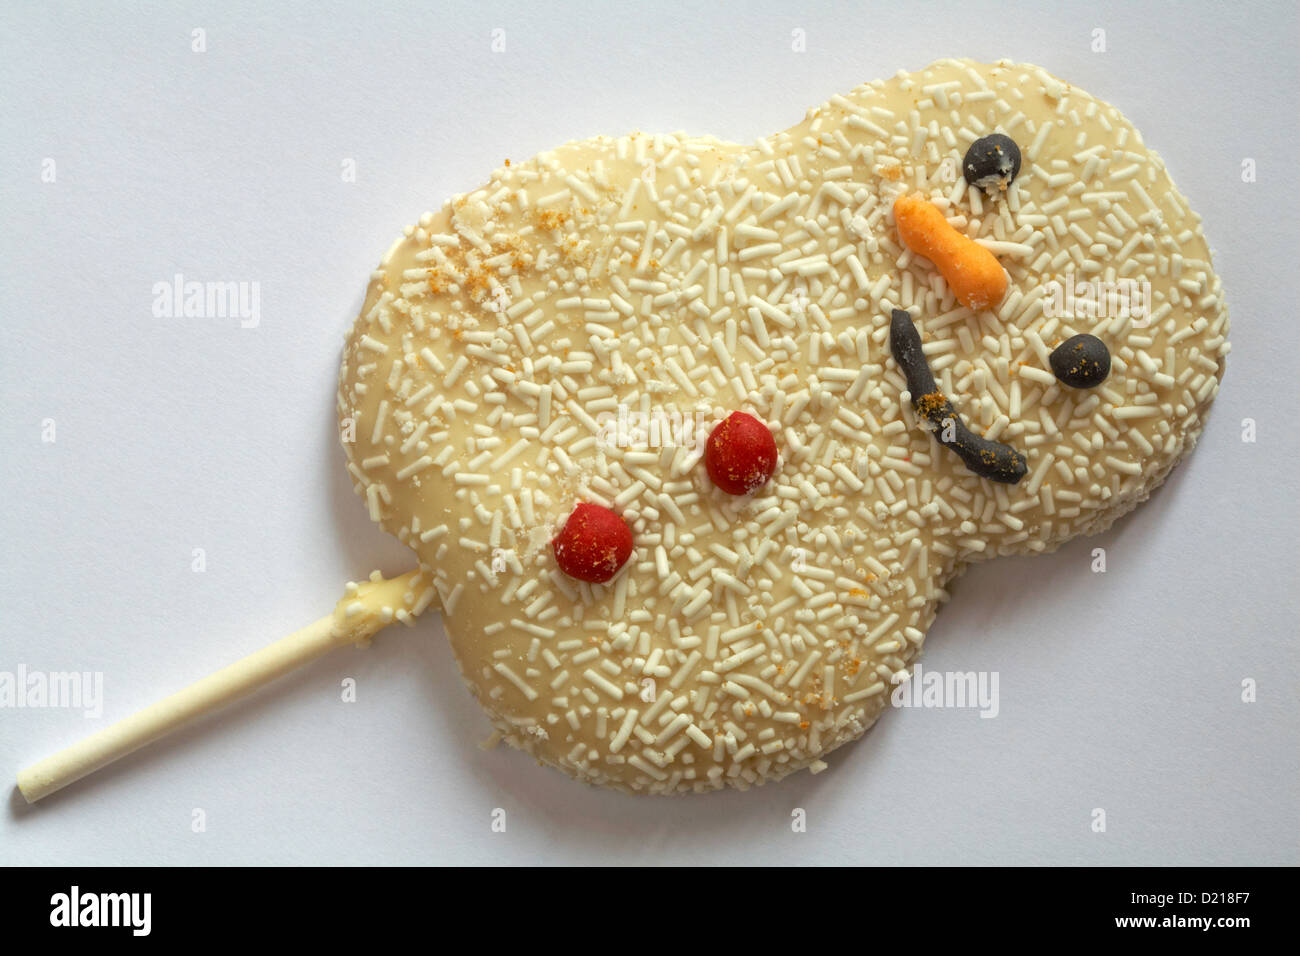 Snowman biscuit lolly on stick isolated on white background Stock Photo